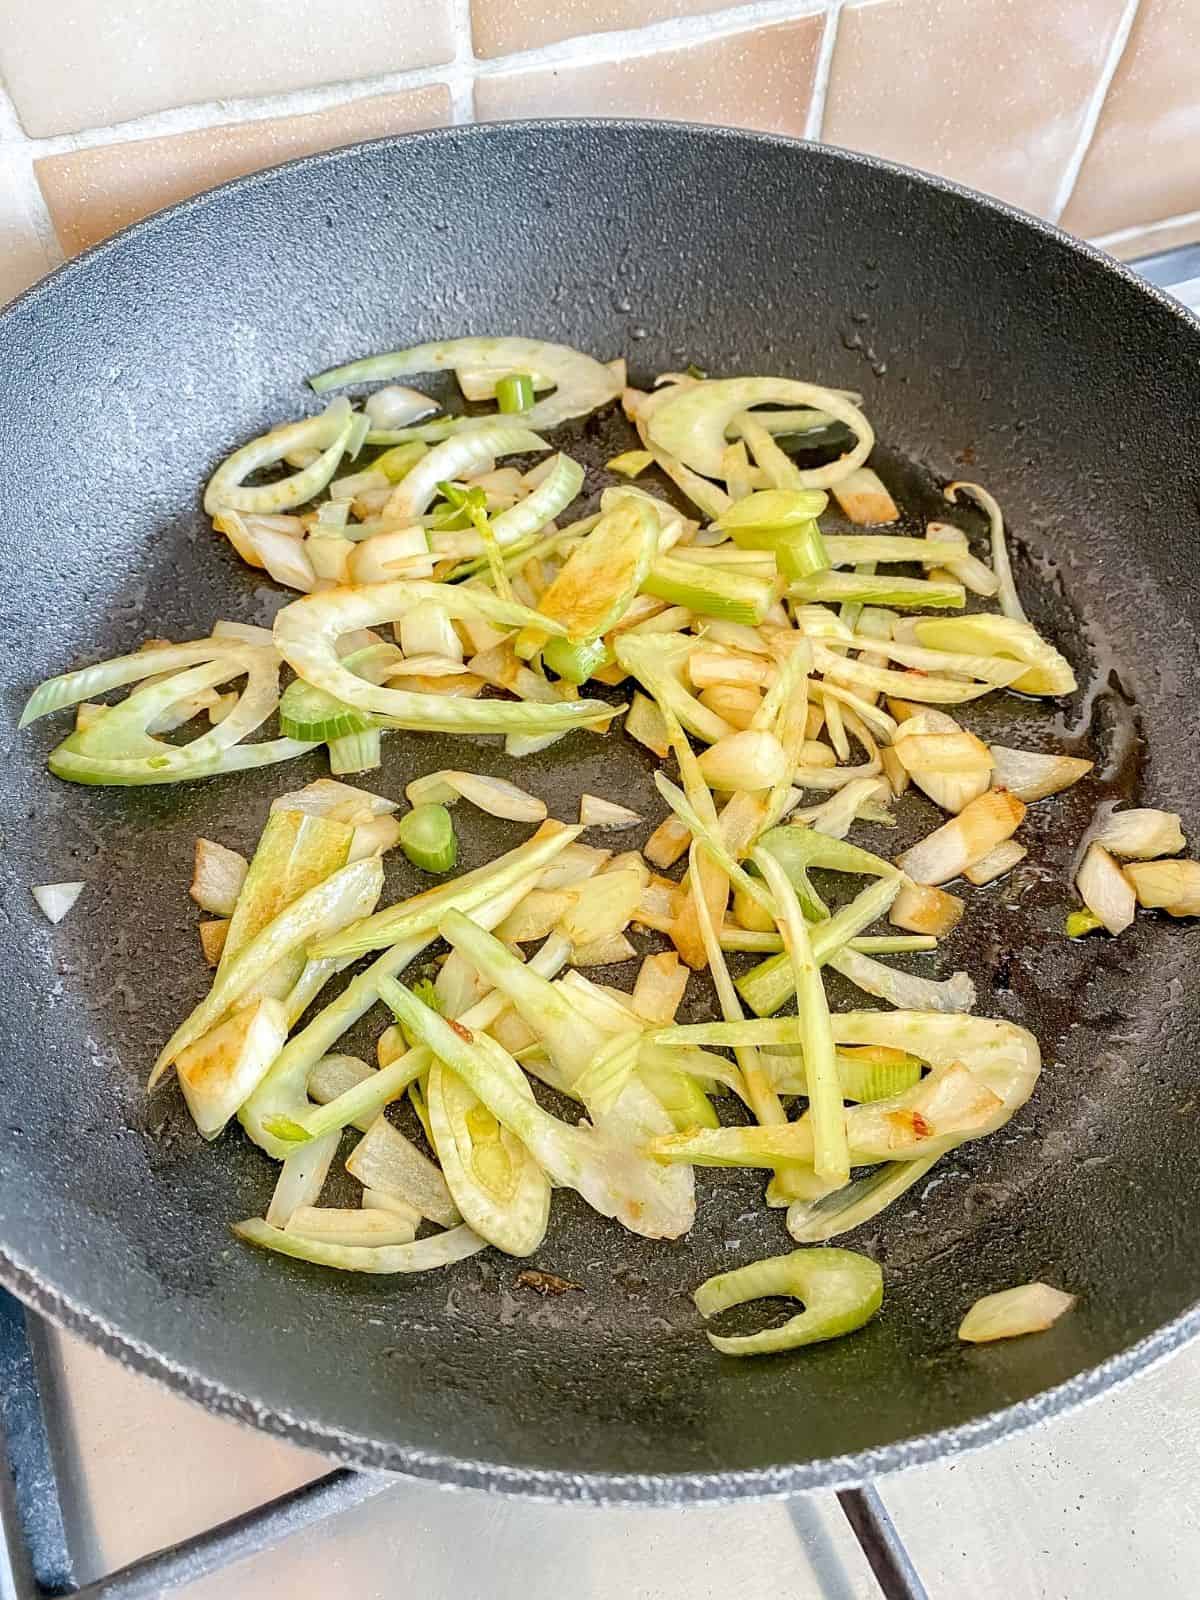 onion and fennel frying in a black skillet on a stove top.